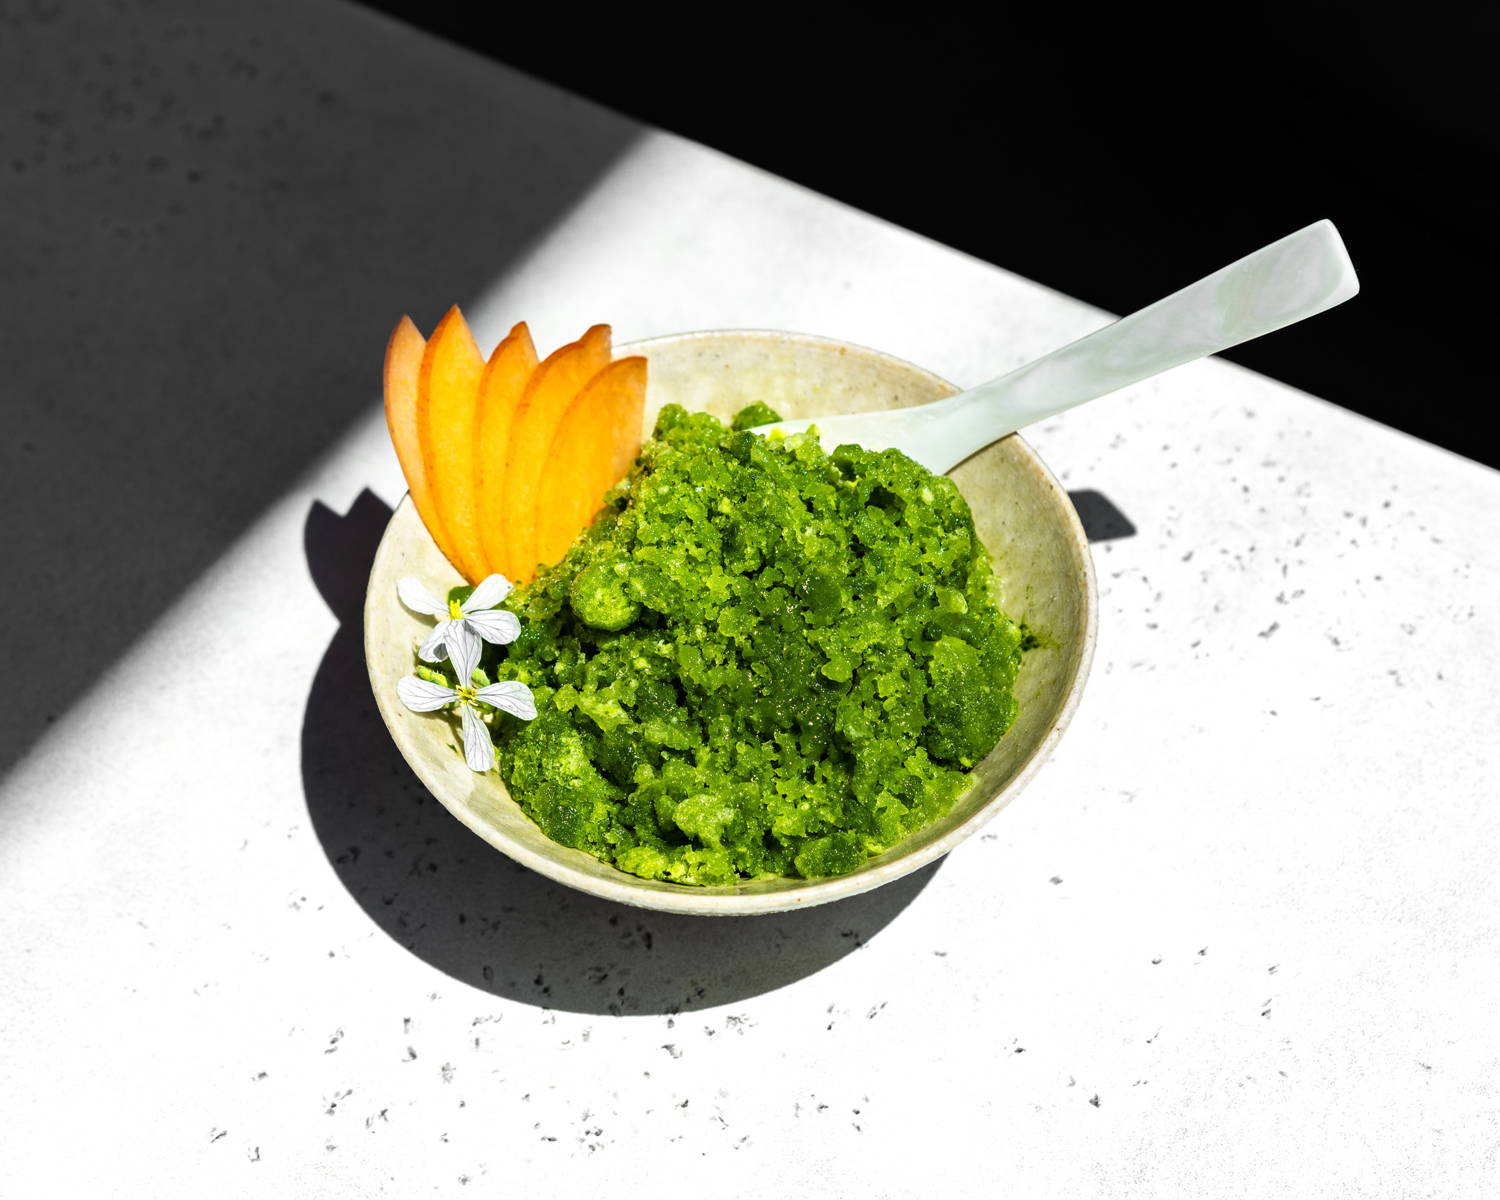  A bowl of bright green shaved ice, garnished with edible flowers and fruit.